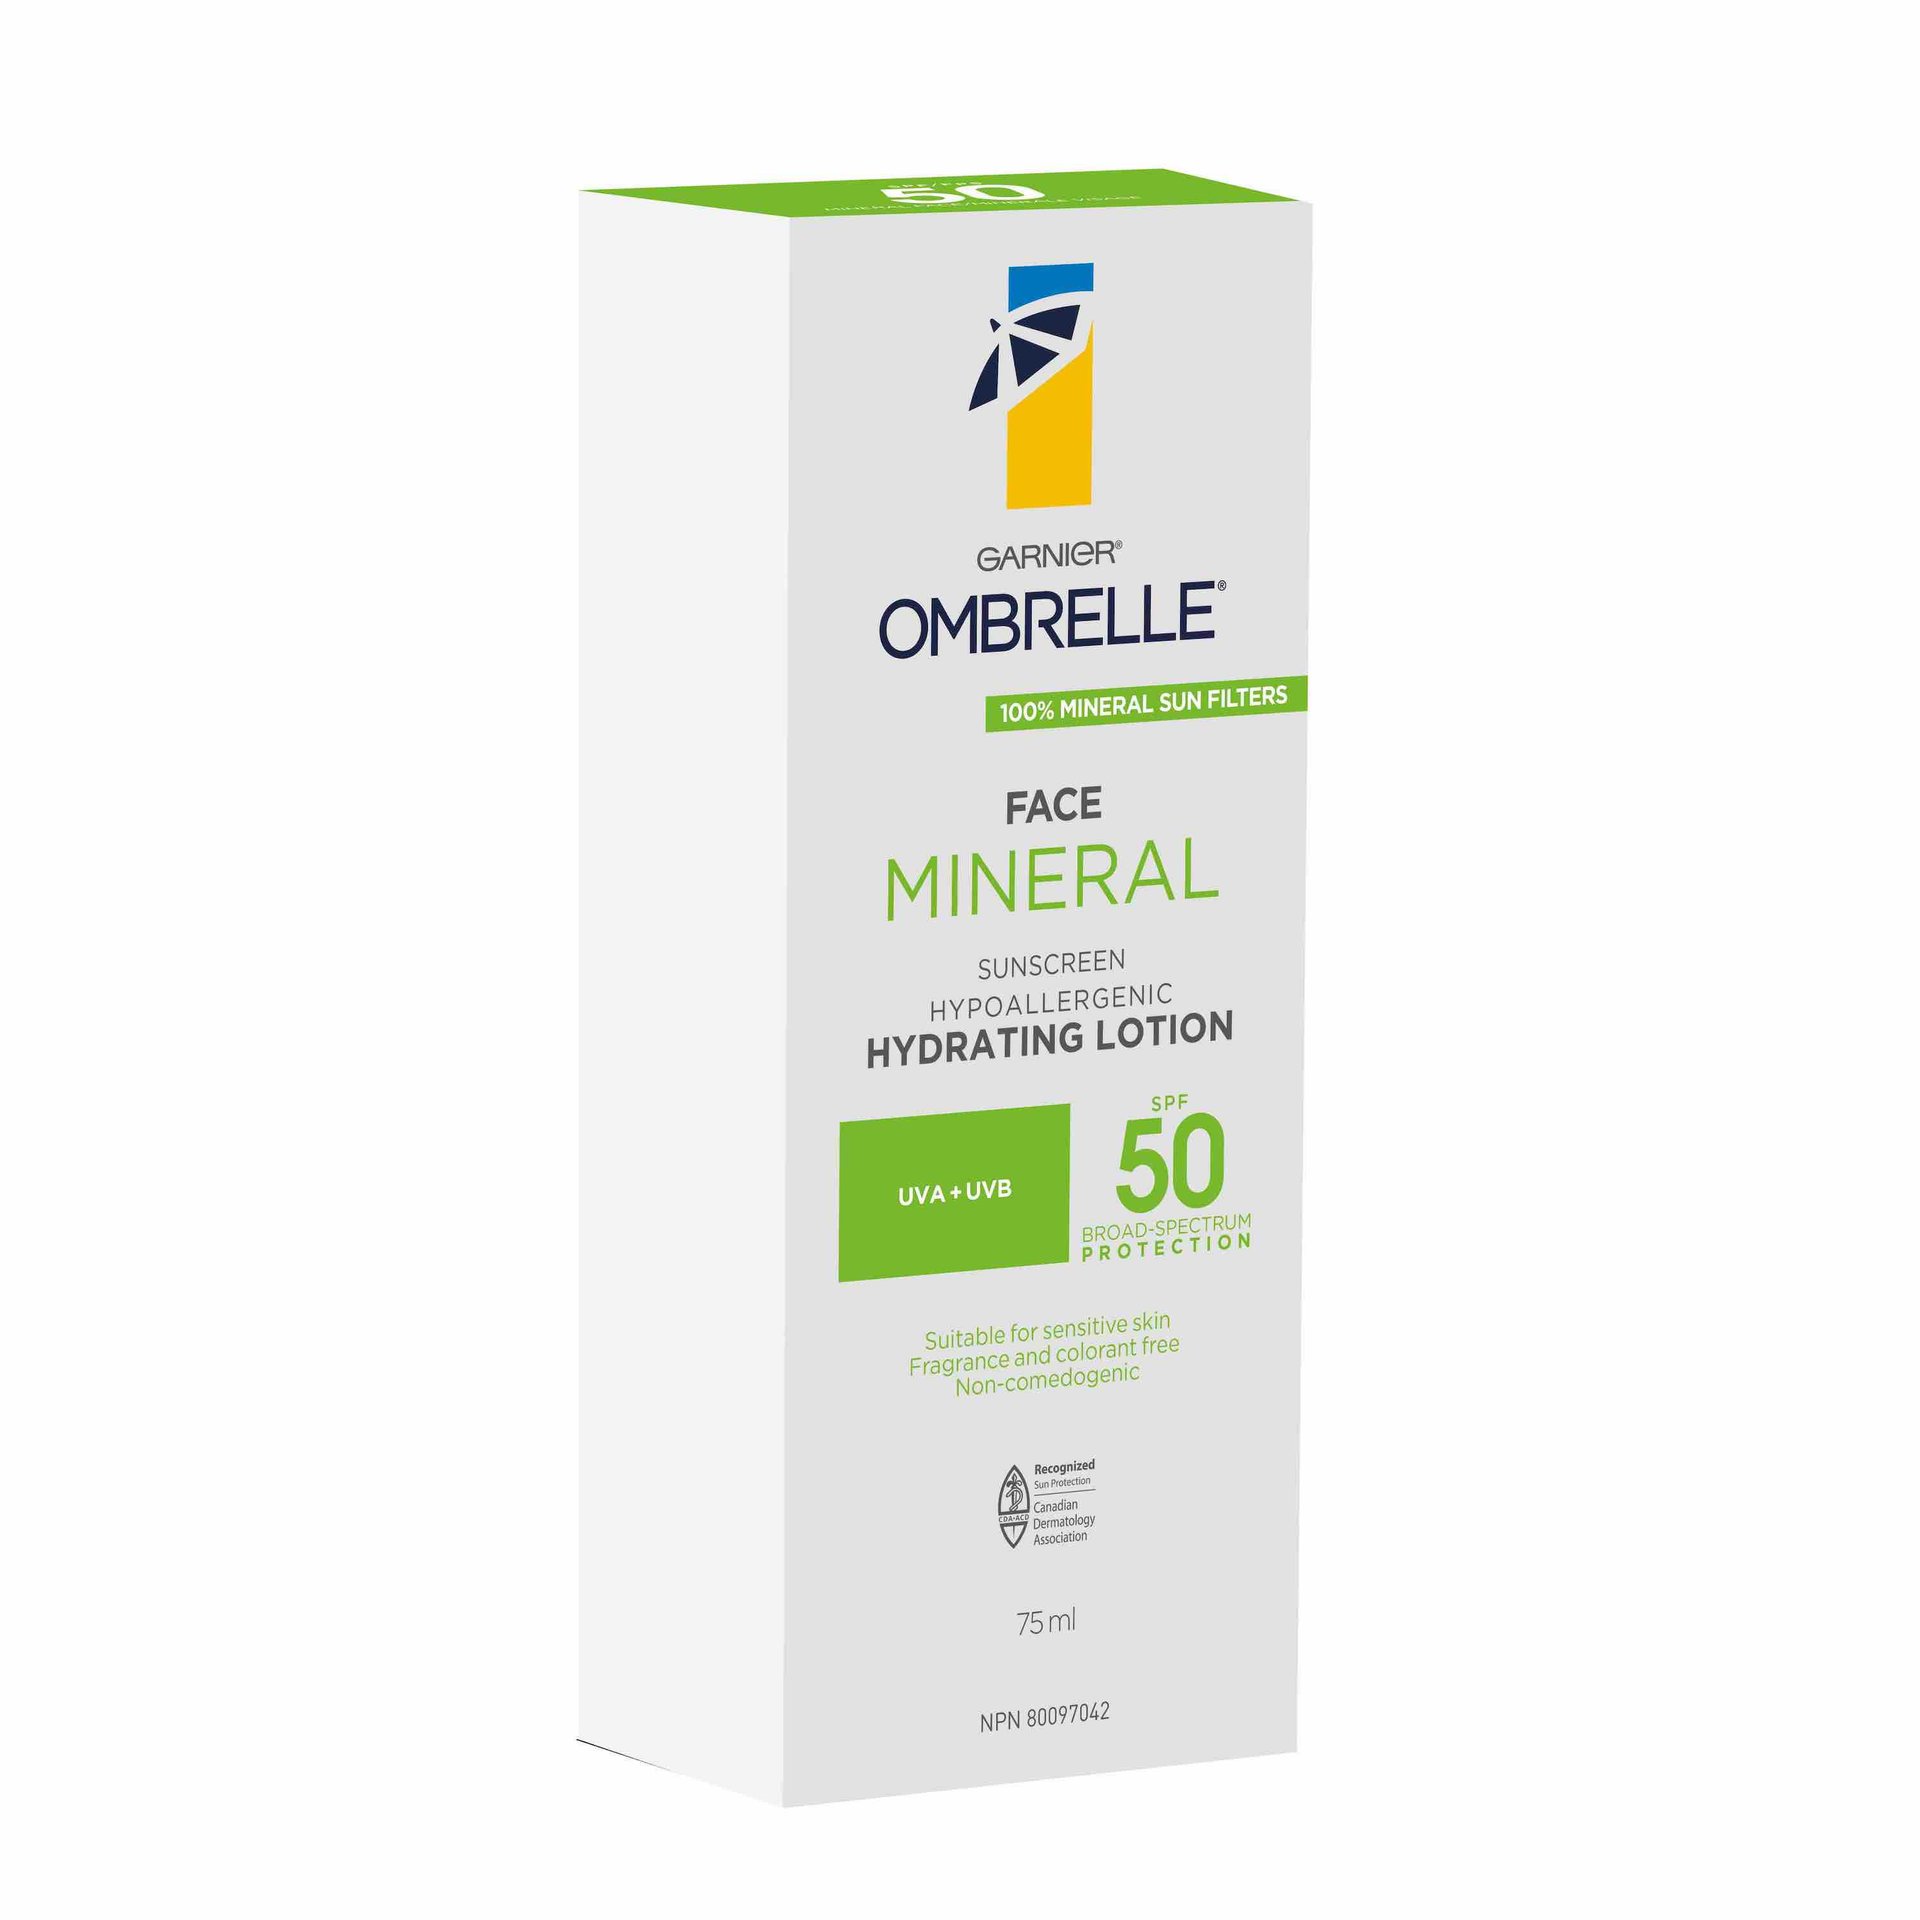 Mineral 75ml box with white side